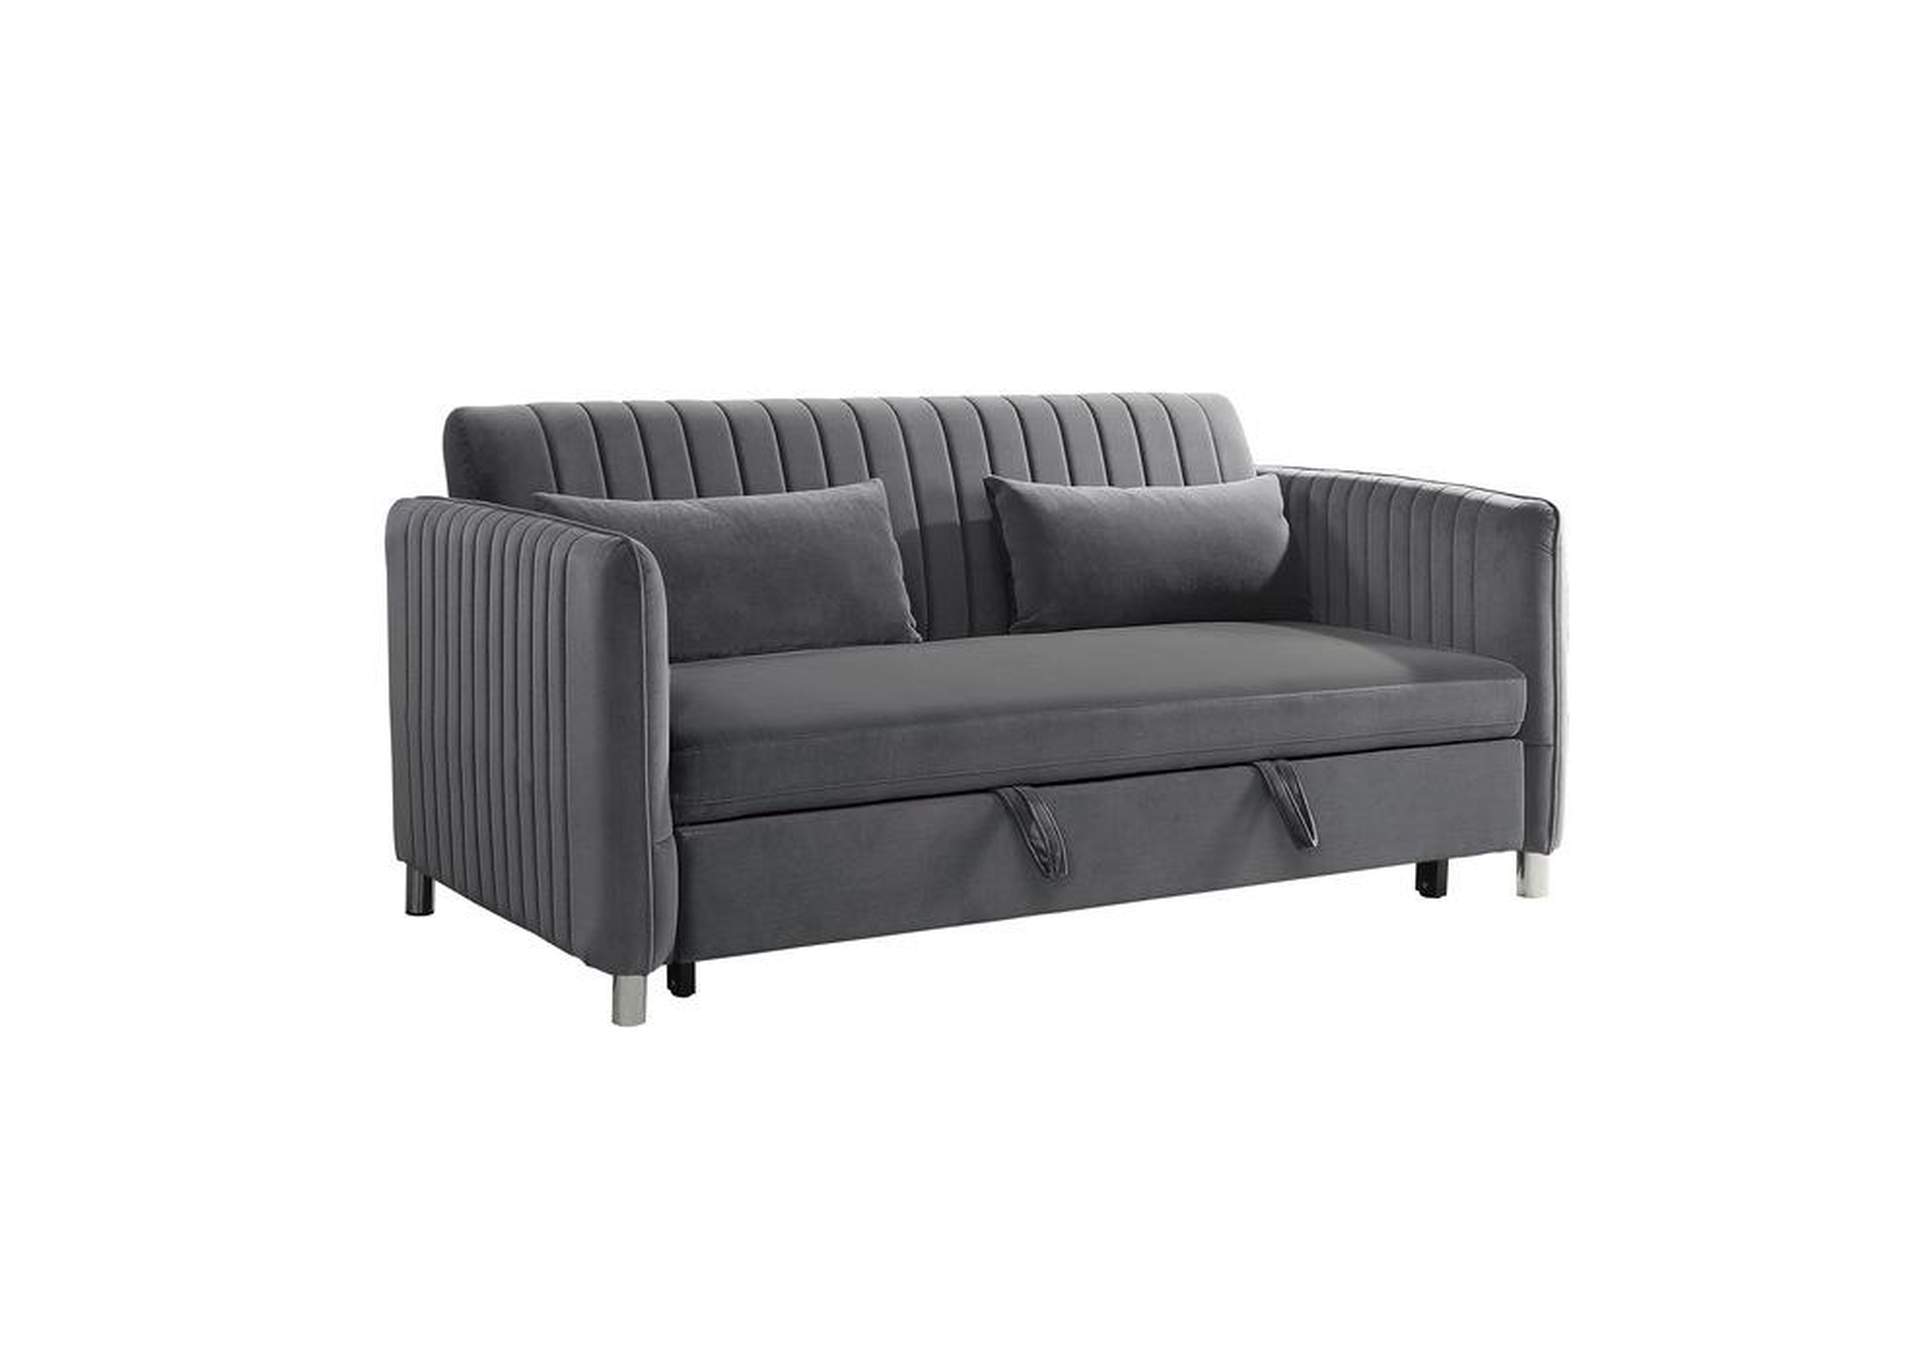 Greenway Convertible Studio Sofa with Pull-out Bed,Homelegance